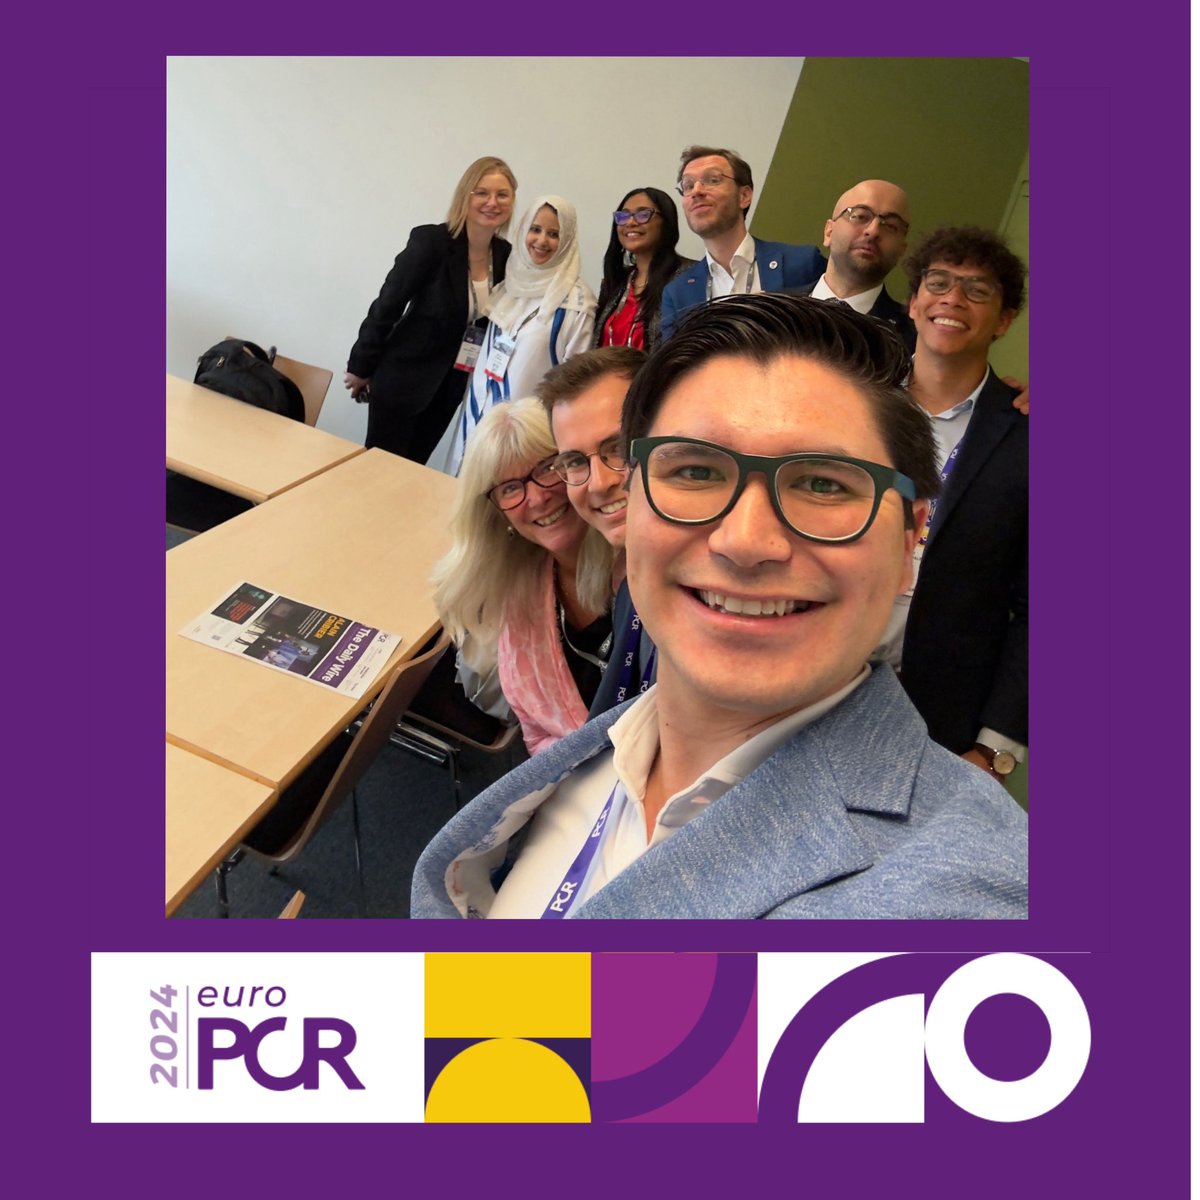 #SoMe Team say Welcome to #EuroPCR!! Follow all the colleagues to dont miss the most important info of the course in real time! @mirvatalasnag @A_Trimaille @m_taramasso @jcecharte @ANazmiCalik @cvnurselin @belcid7 @aayshacader @Marta33717088 @elenacalvo_bcn @KardiologieHH